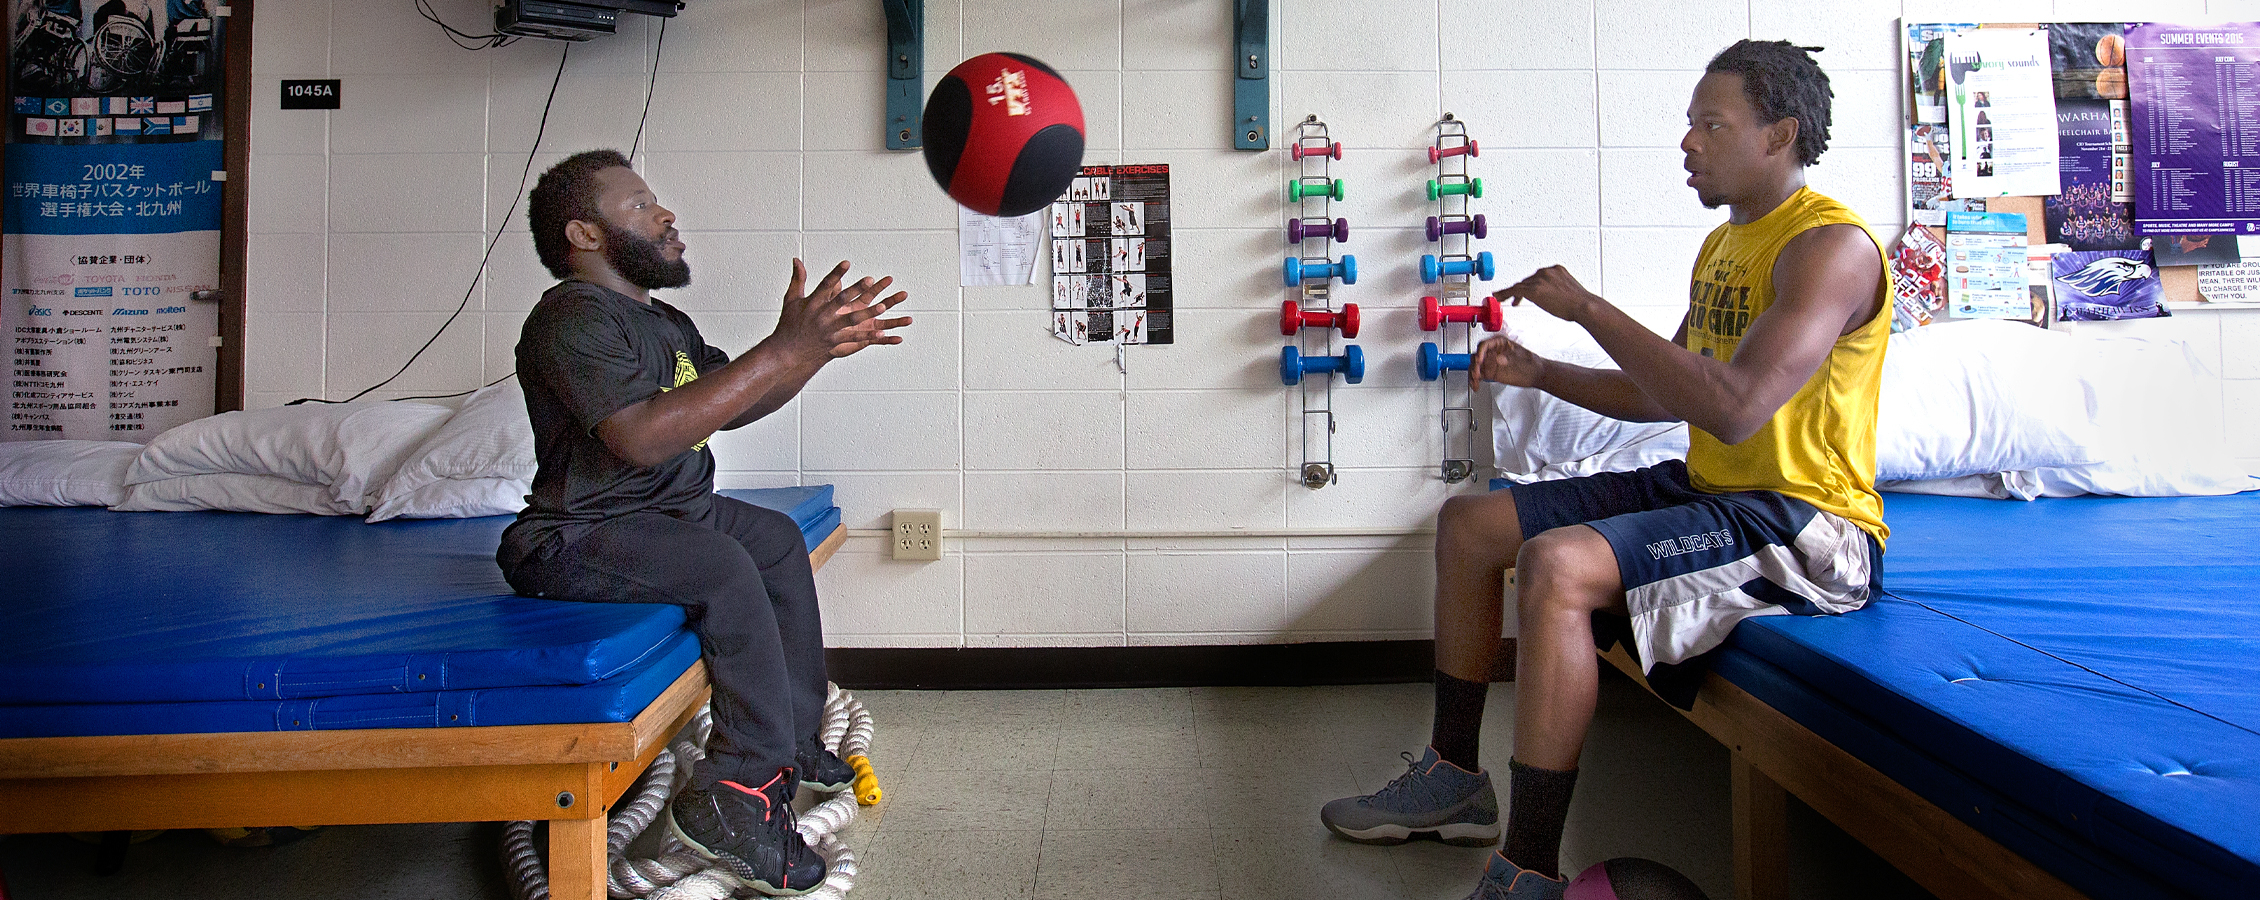 Two people toss a medicine ball while sitting down in a training room.